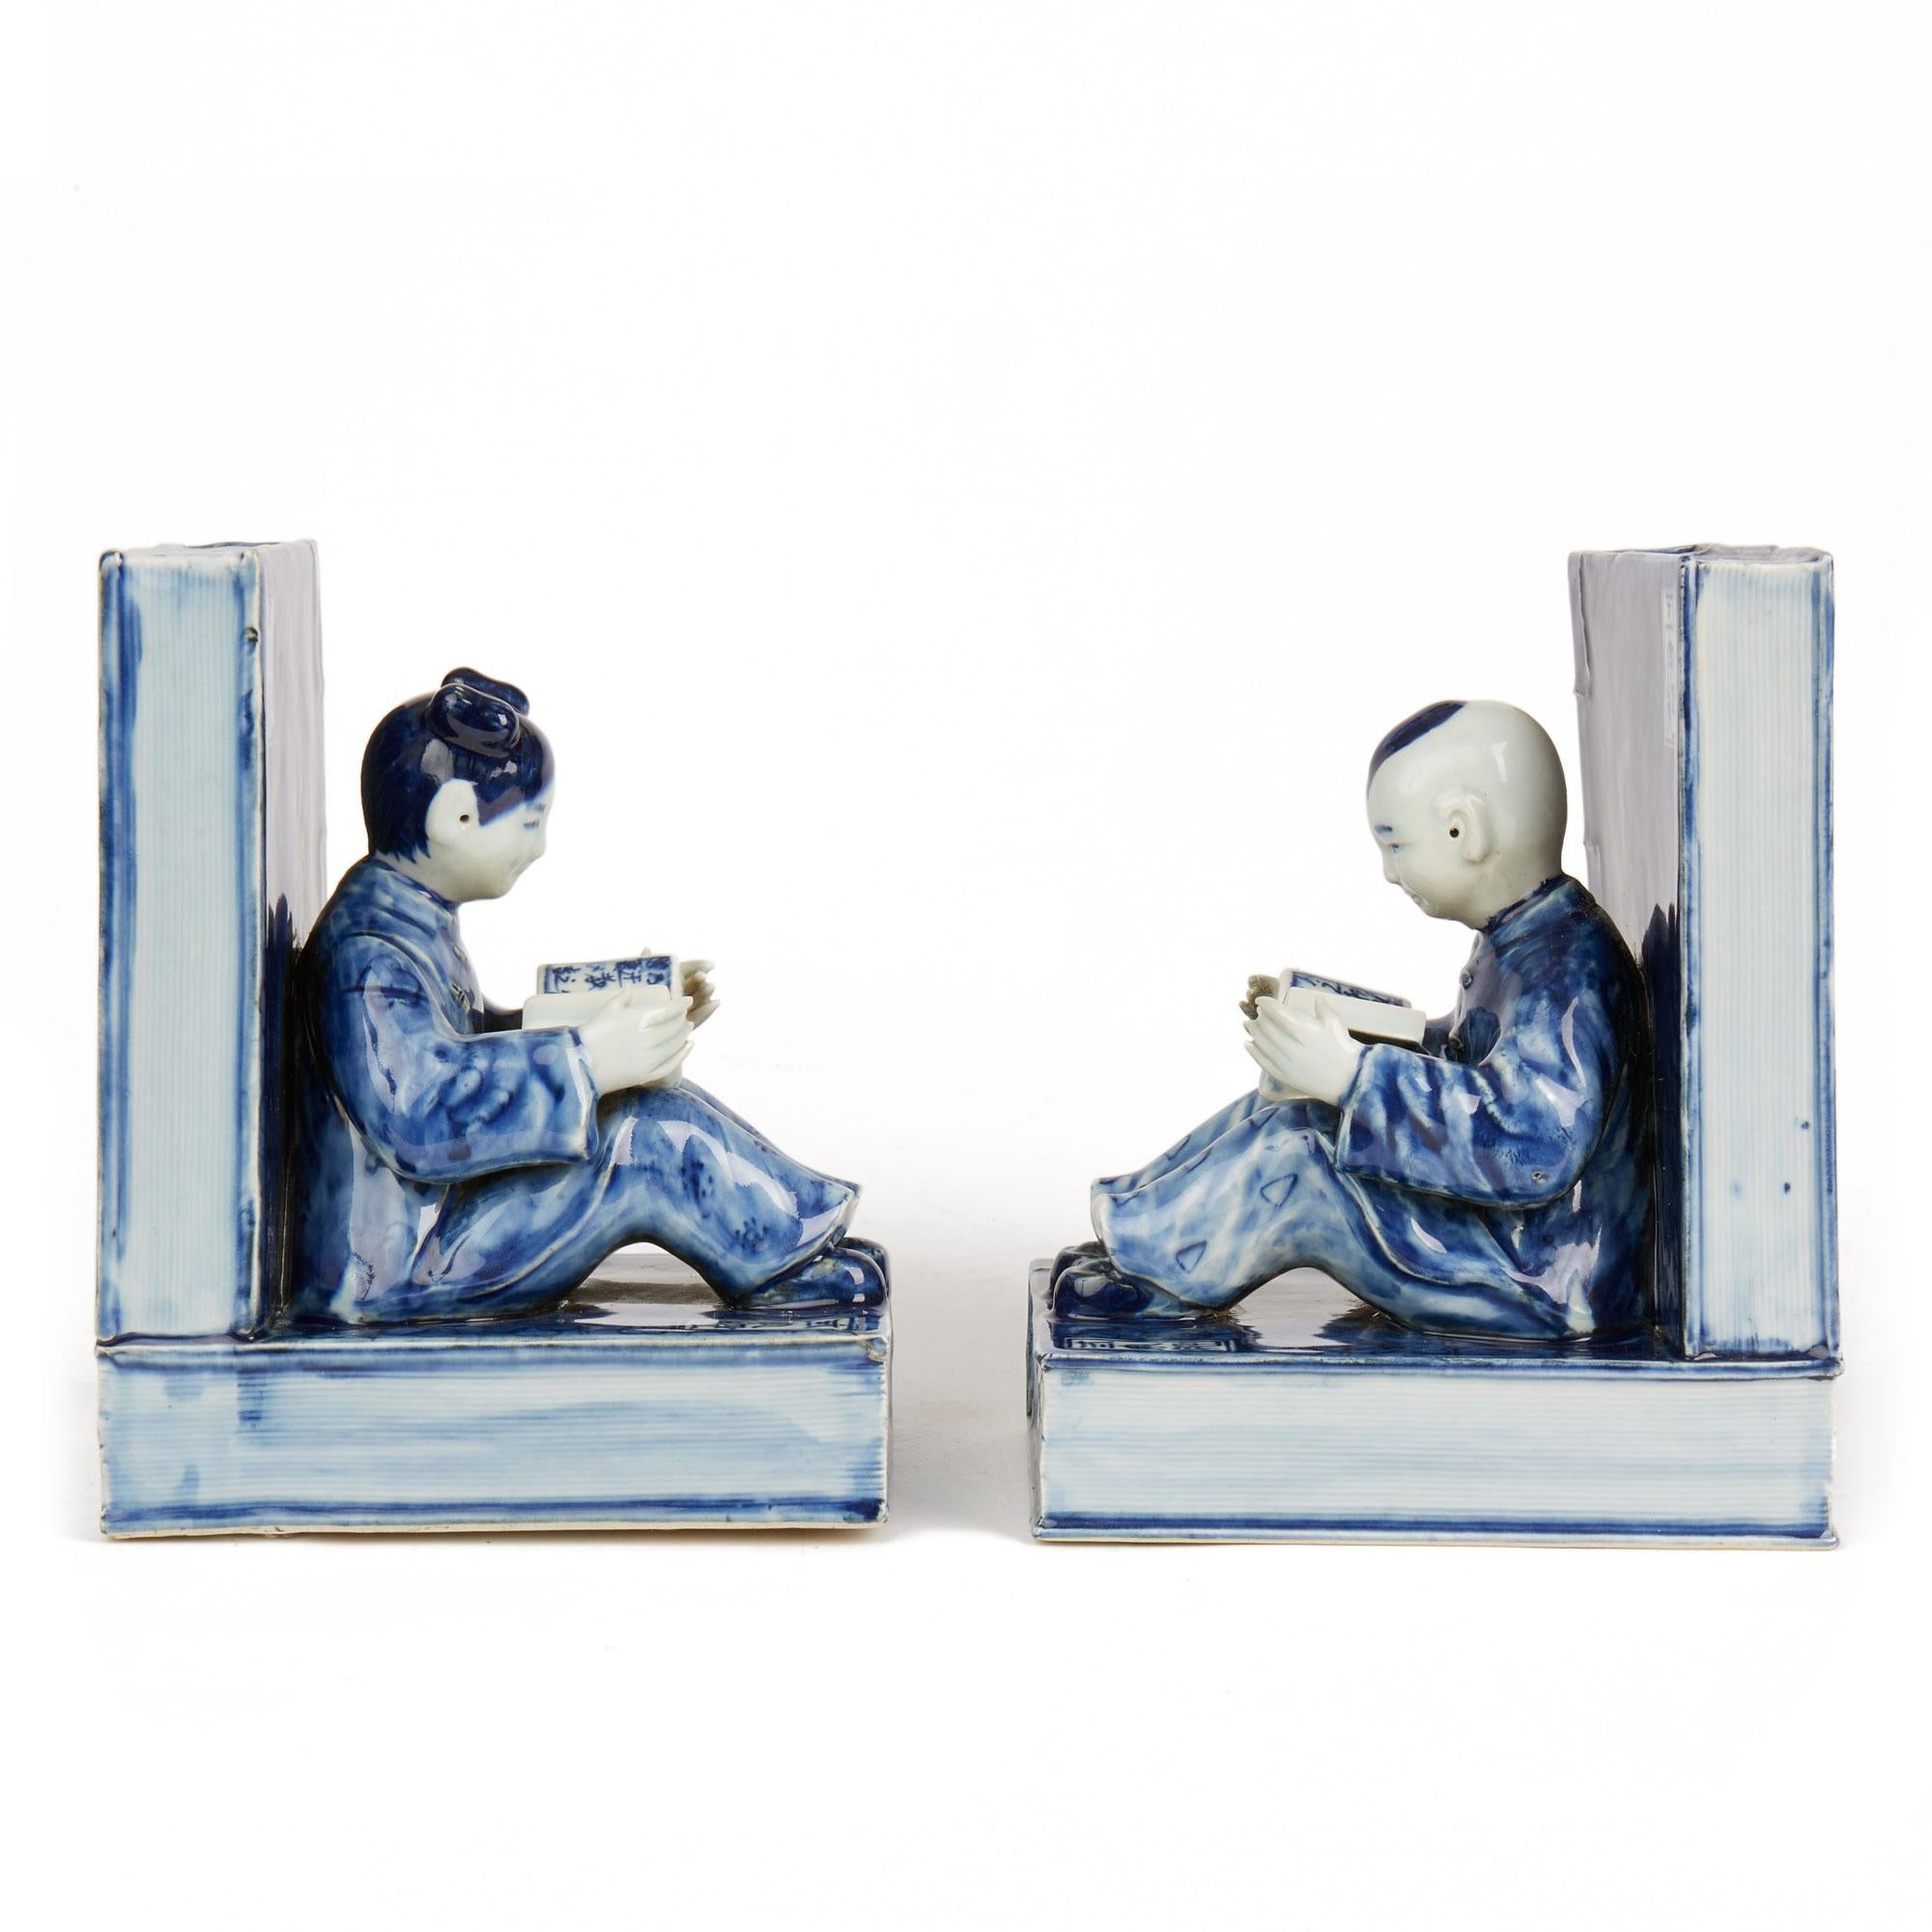 Glazed Pair of Chinese Republic Porcelain Figural Bookends